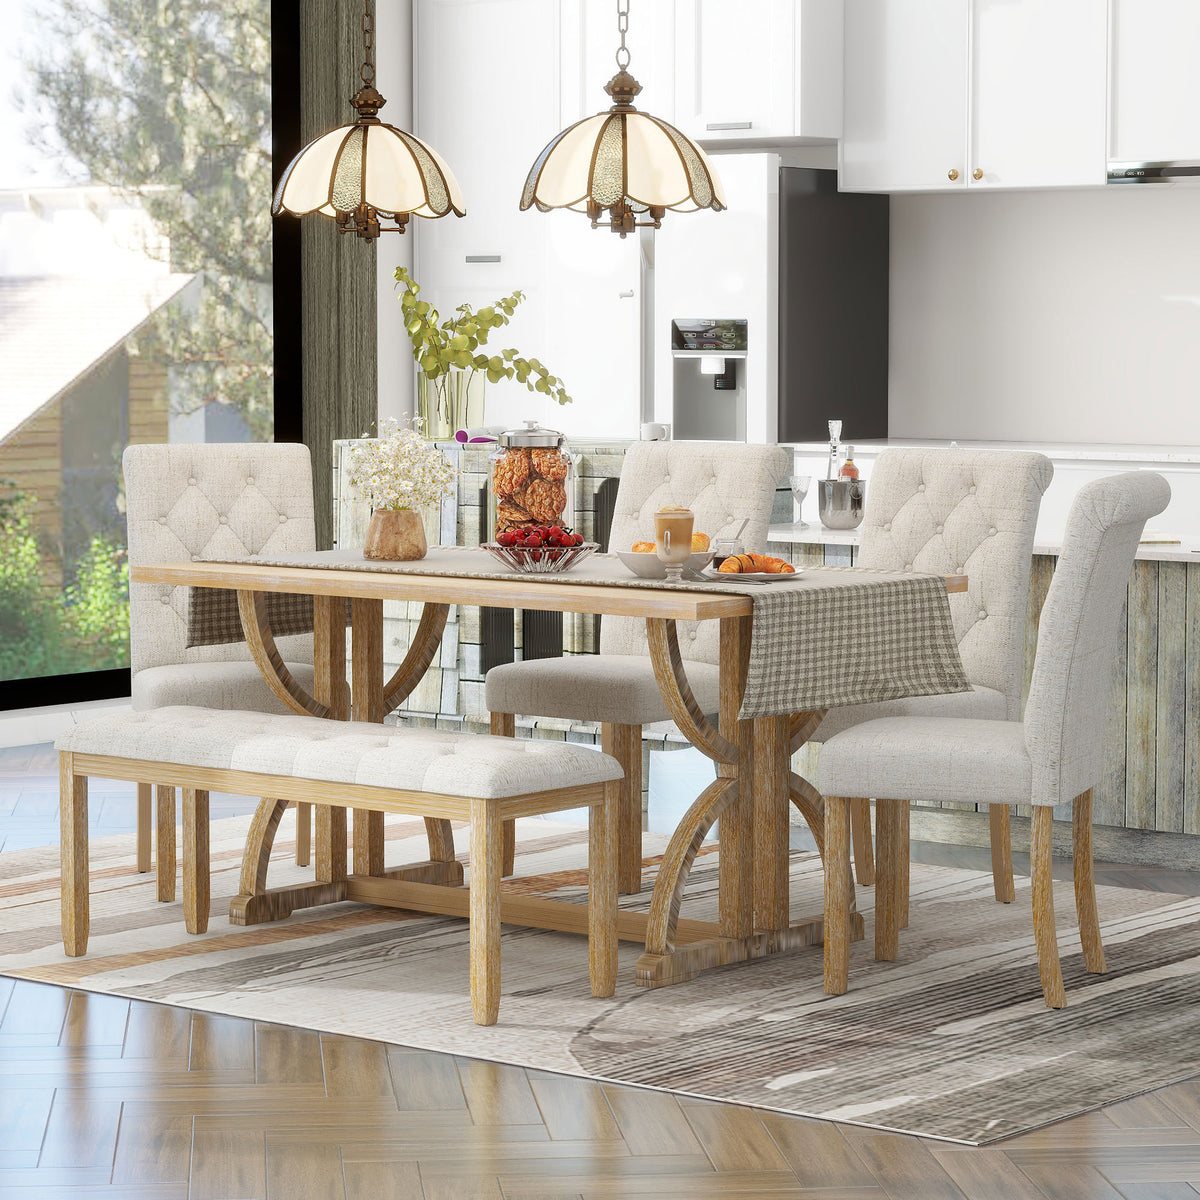 6-Piece Retro Rectangular Dining Table Set, Table with Unique Legs and 4 Upholstered Chairs & 1 Bench - Natural Wood Wash